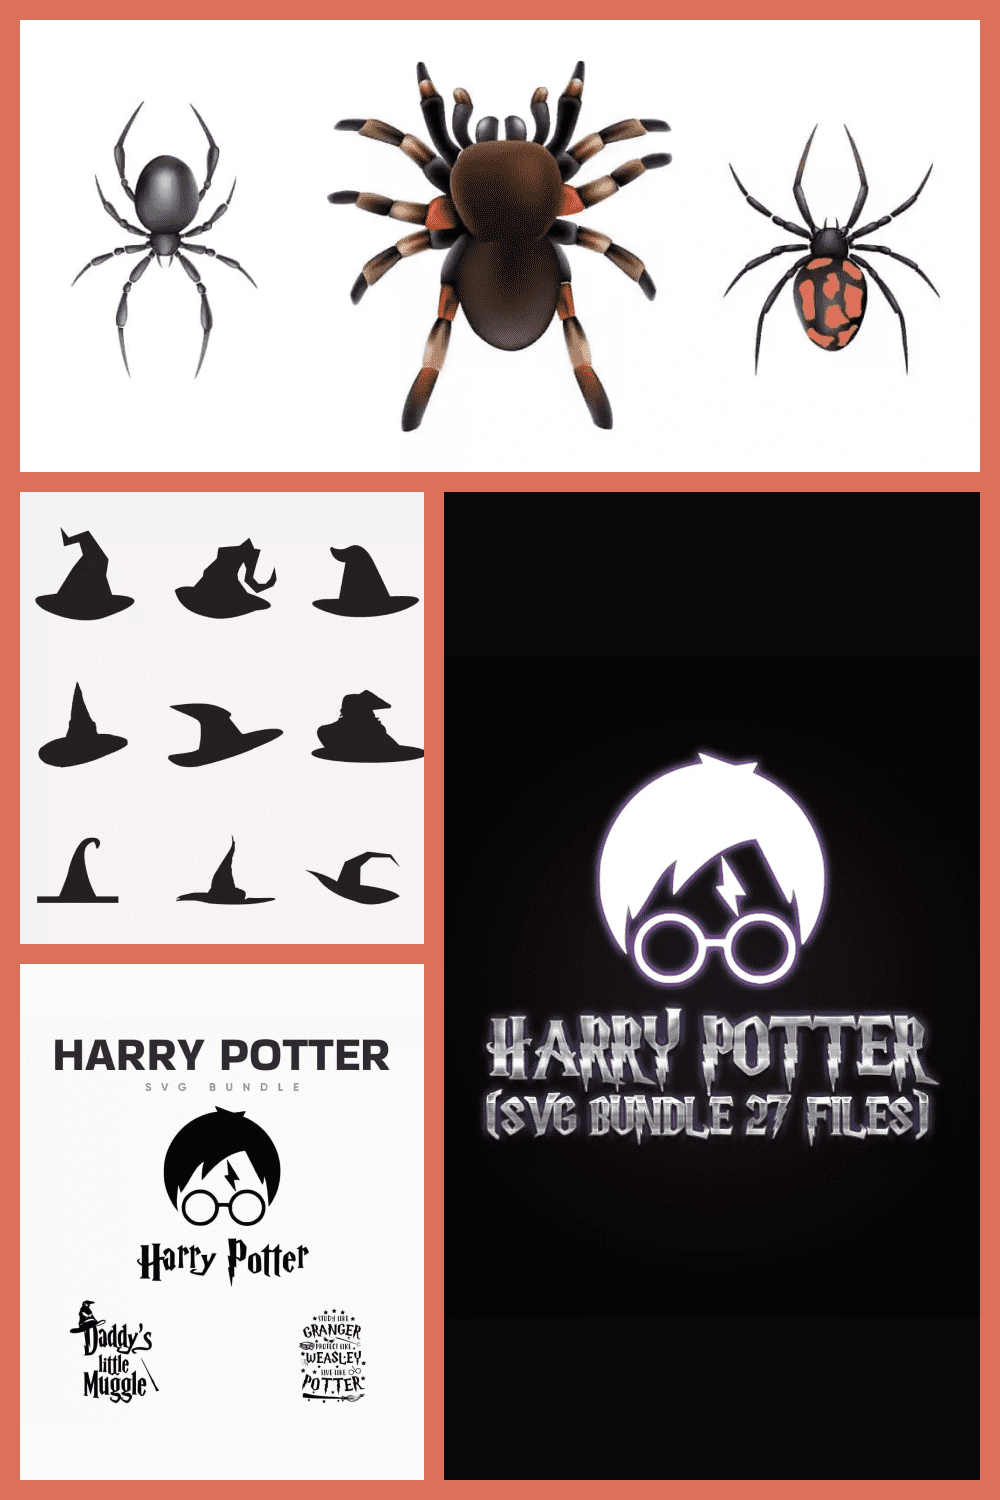 Collage of spiders, witch hats and Harry Potter head sketch.